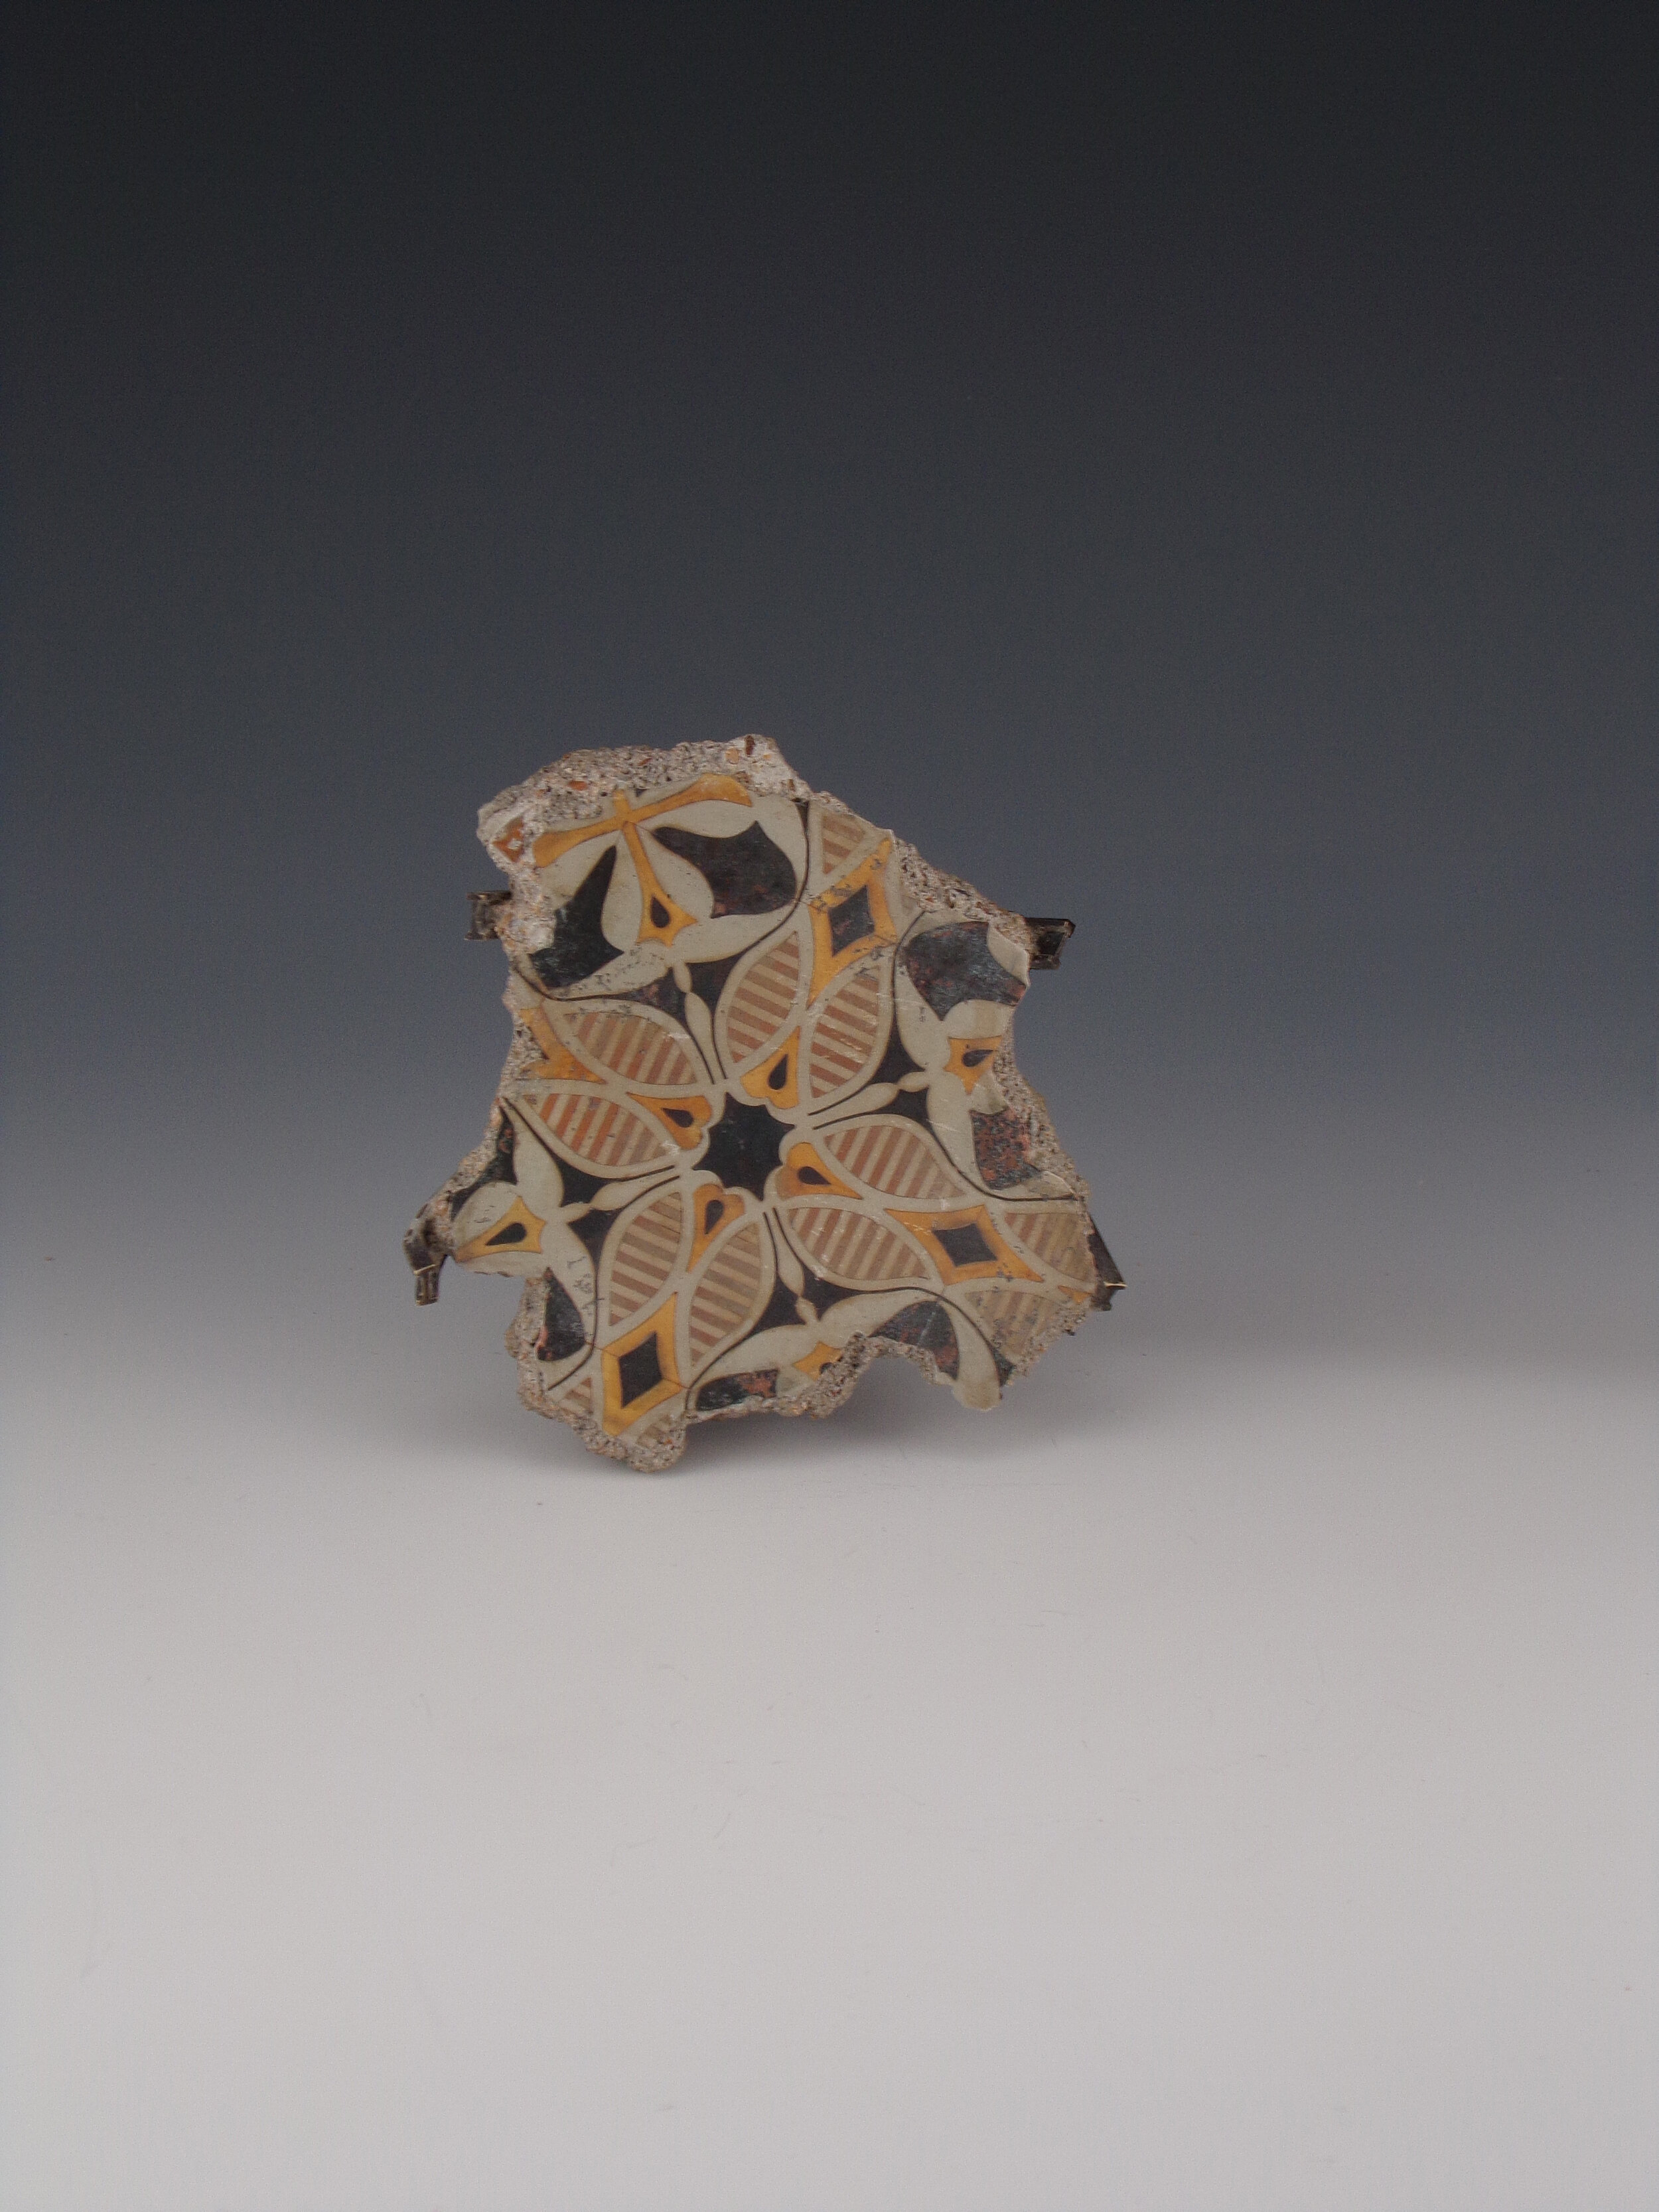 Fragments #3, 2.5” x 2.25” x .75”, nickel, copper, brass, silver (married metals), cast, cement, 2018